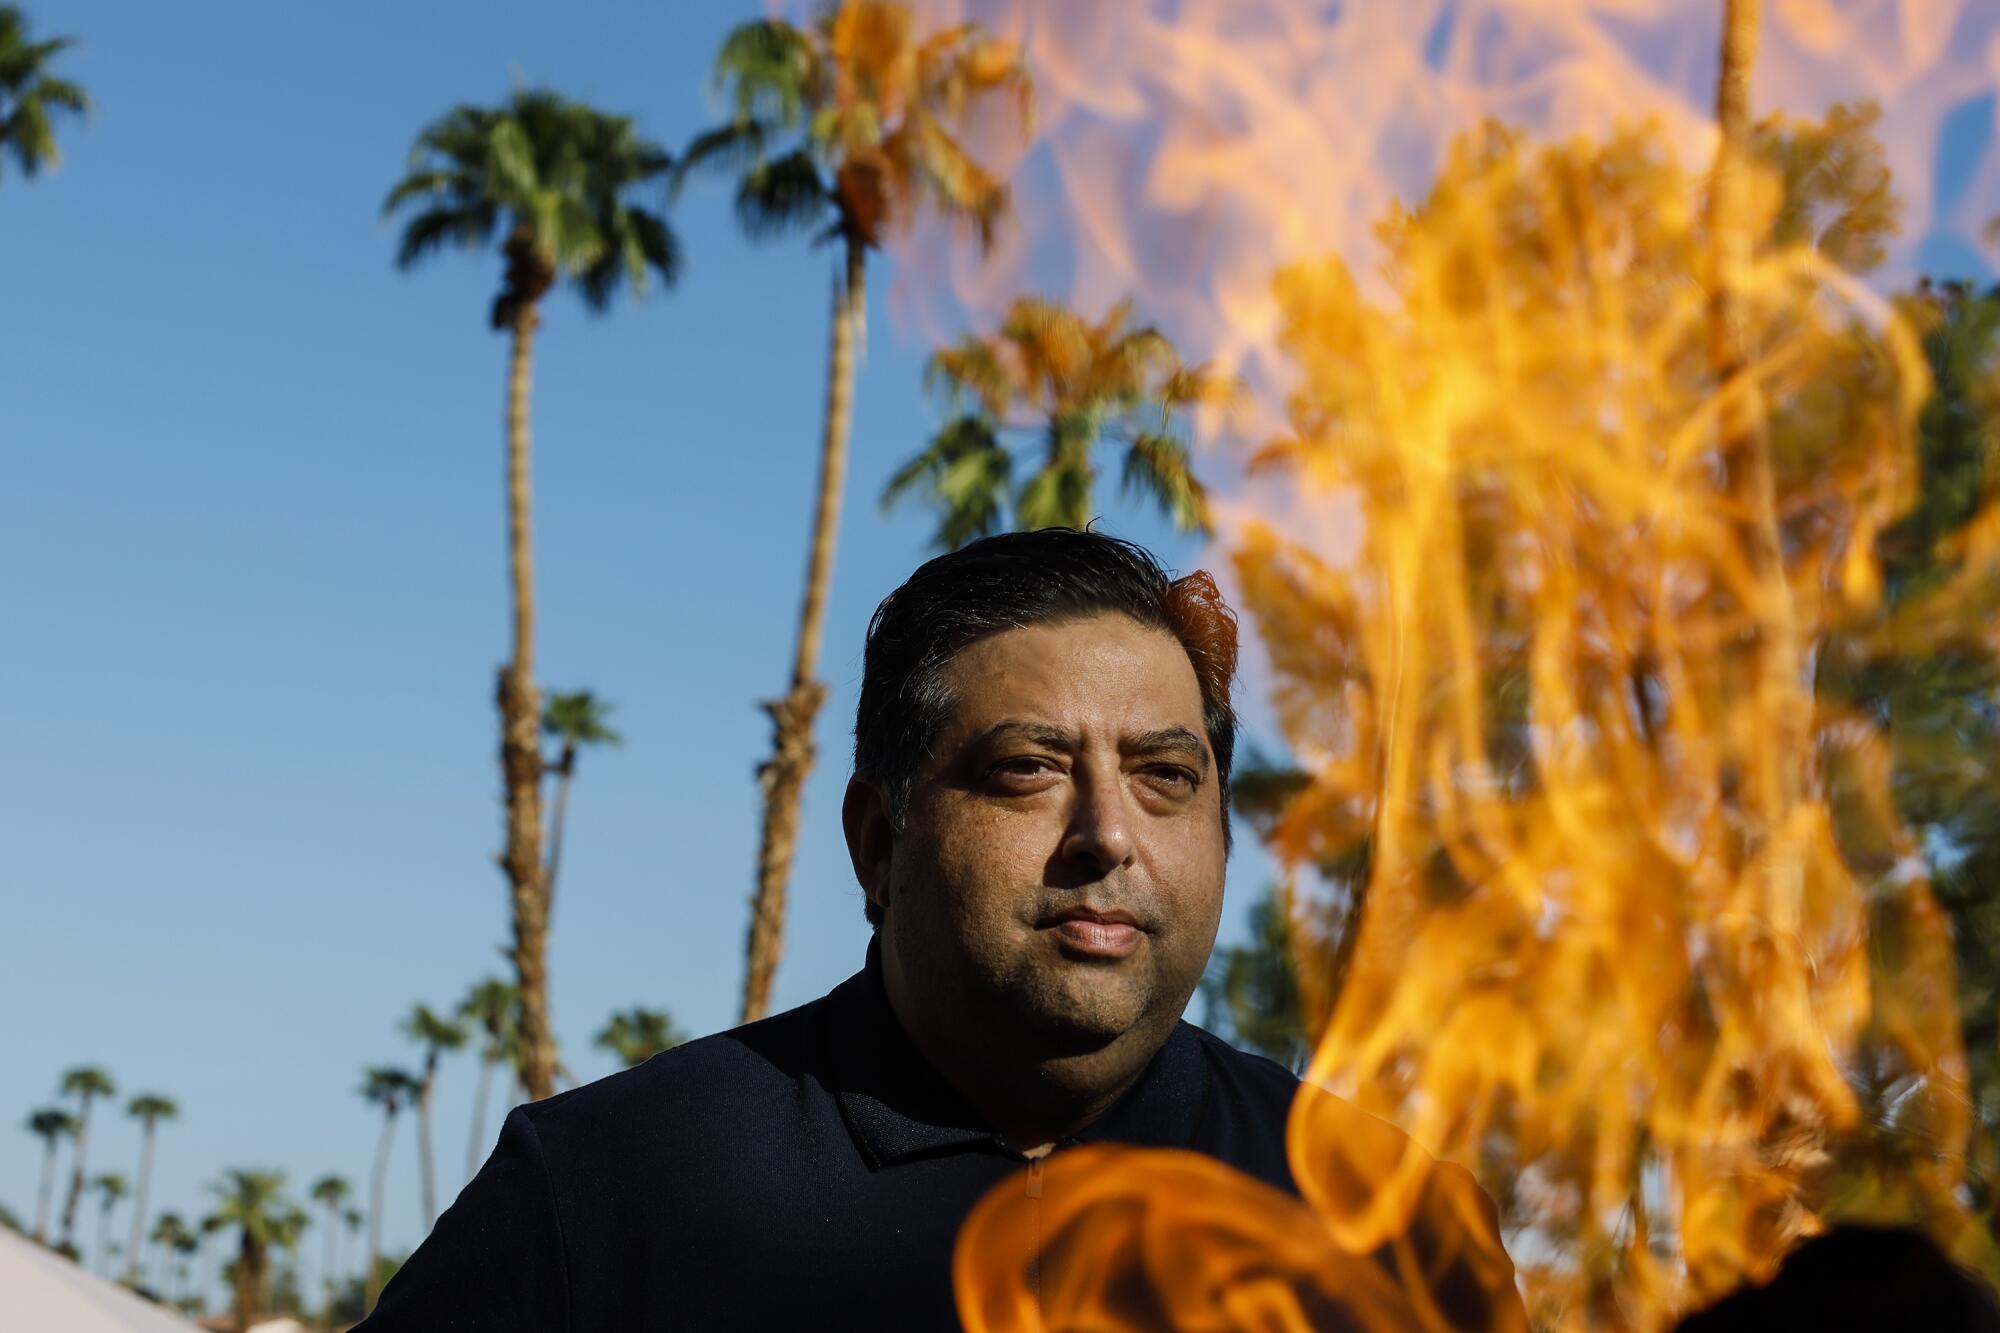 A man standing among palm trees beside a large daytime bonfire.